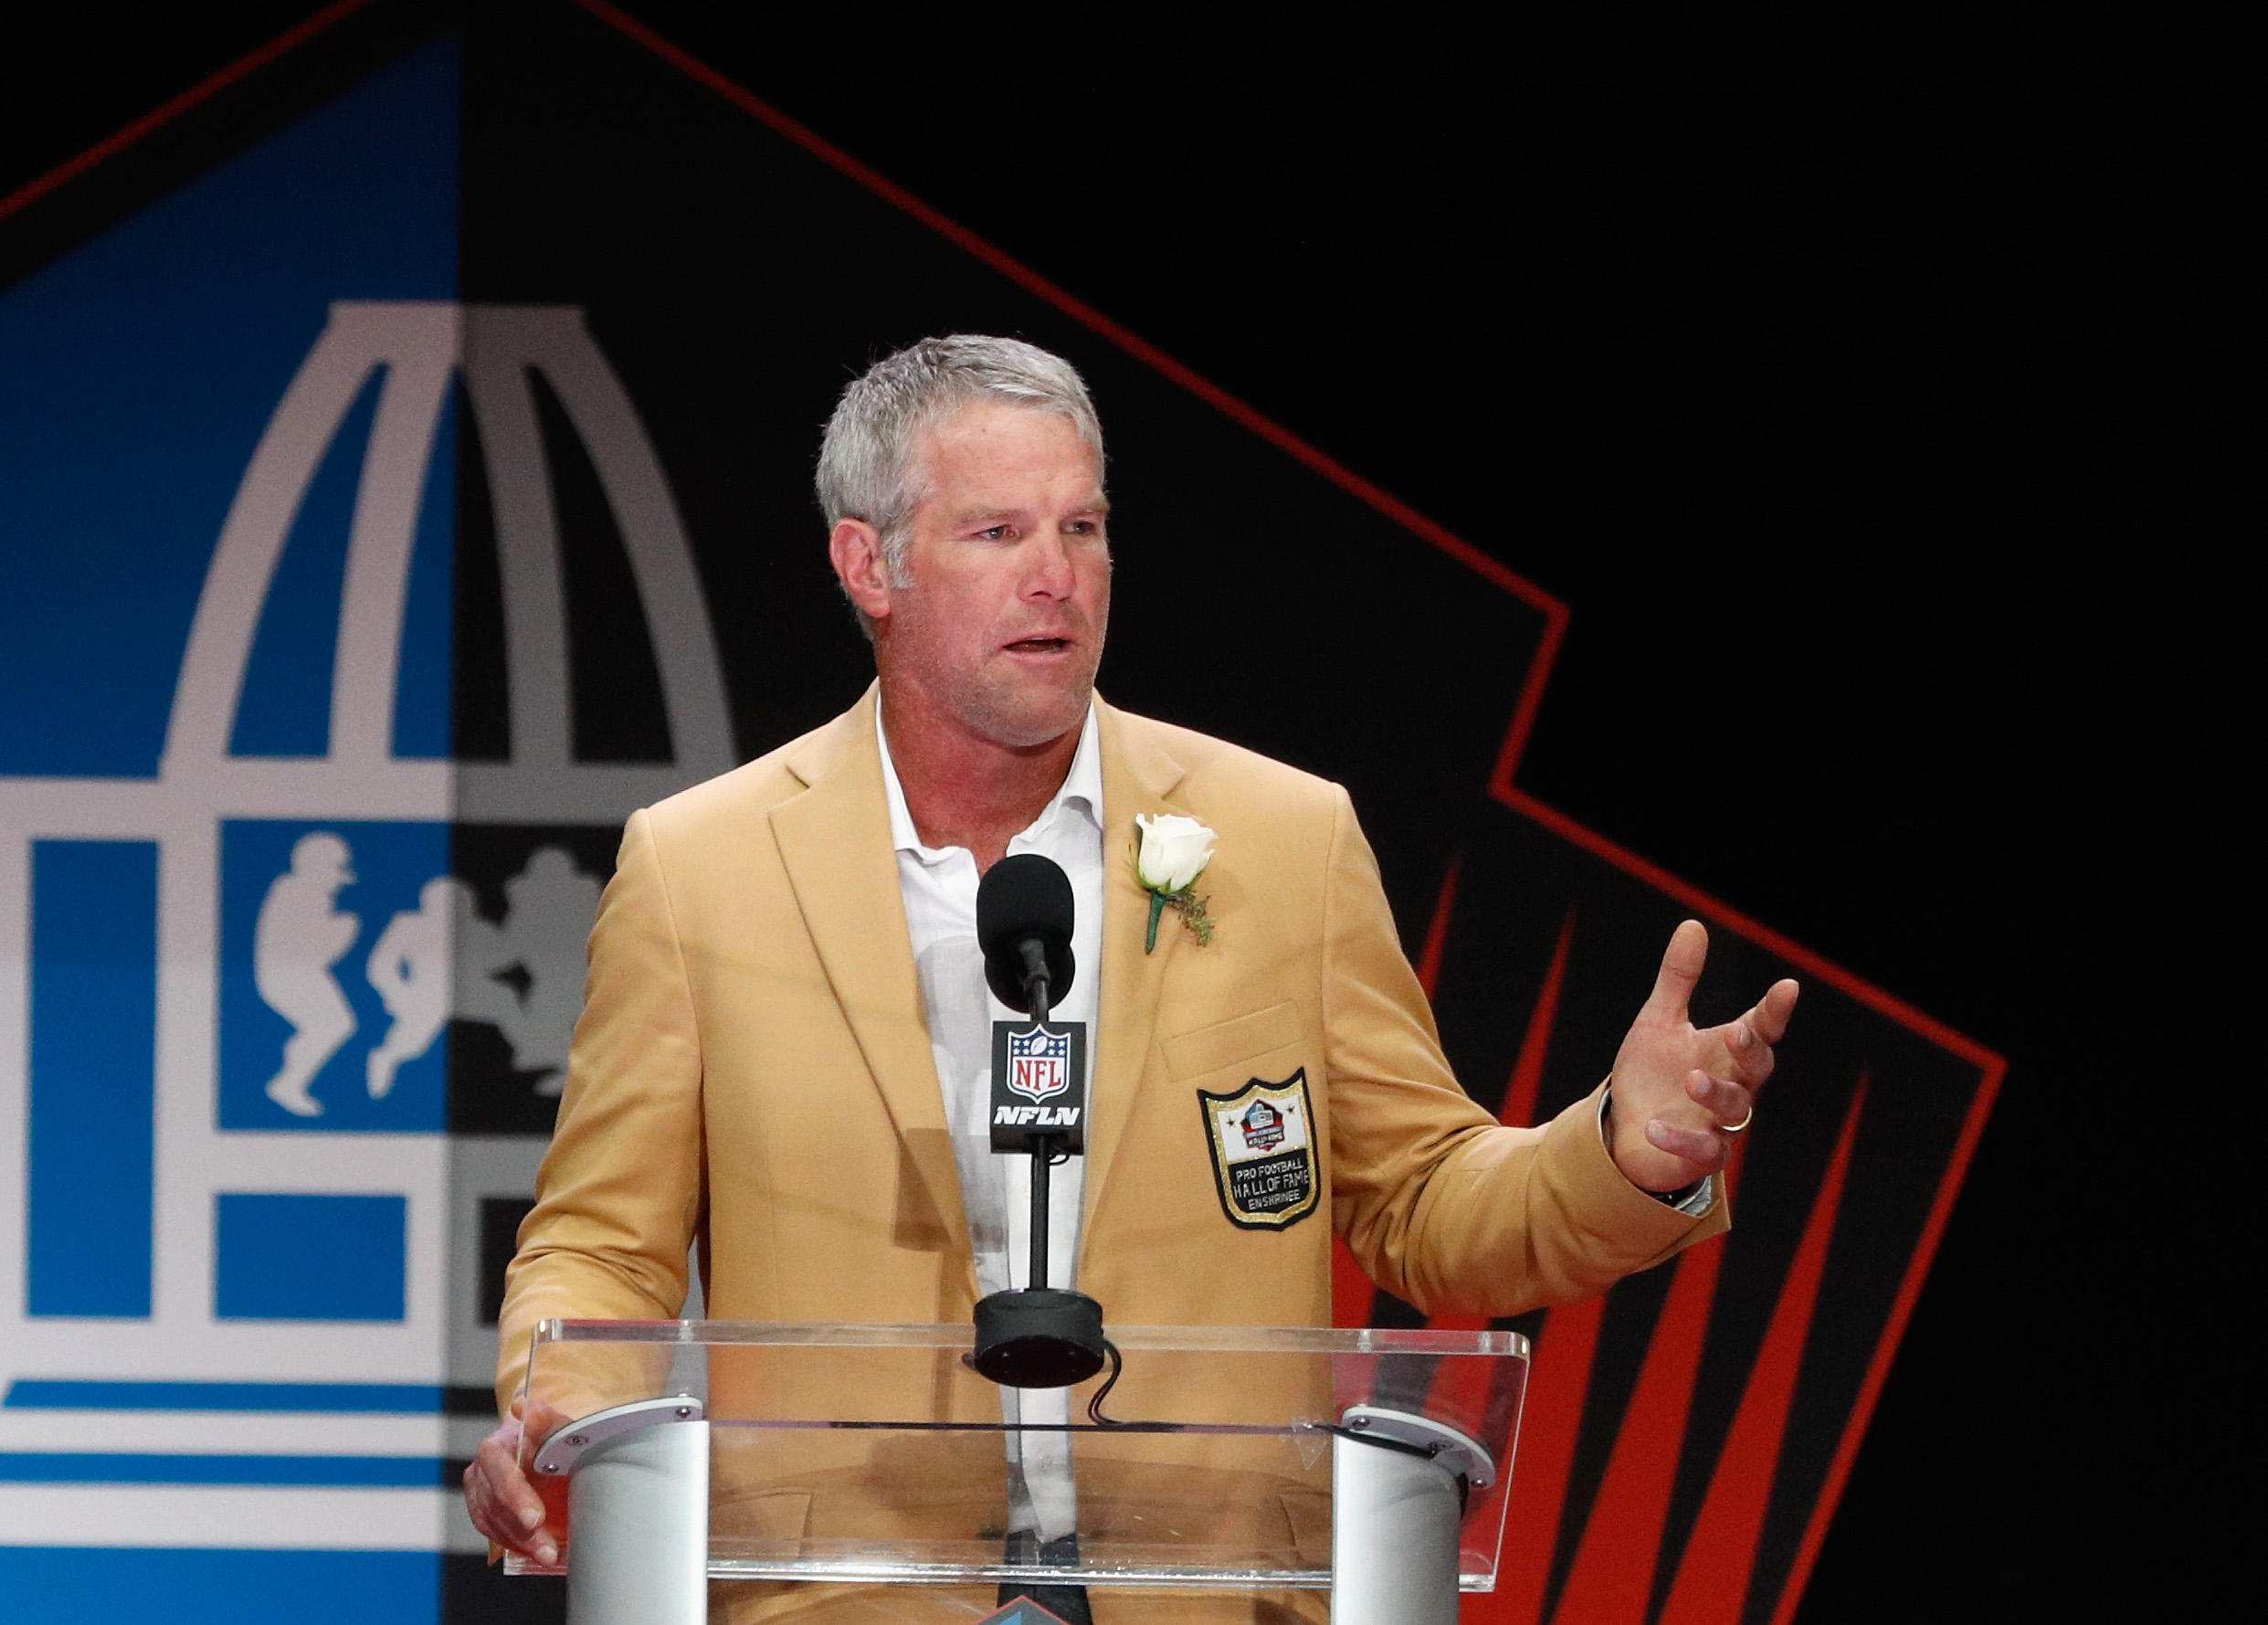 Brett Favre tricked The former NFL quarterback, Soulja Boy and Andy Dick tricked into filming video message for hate group image